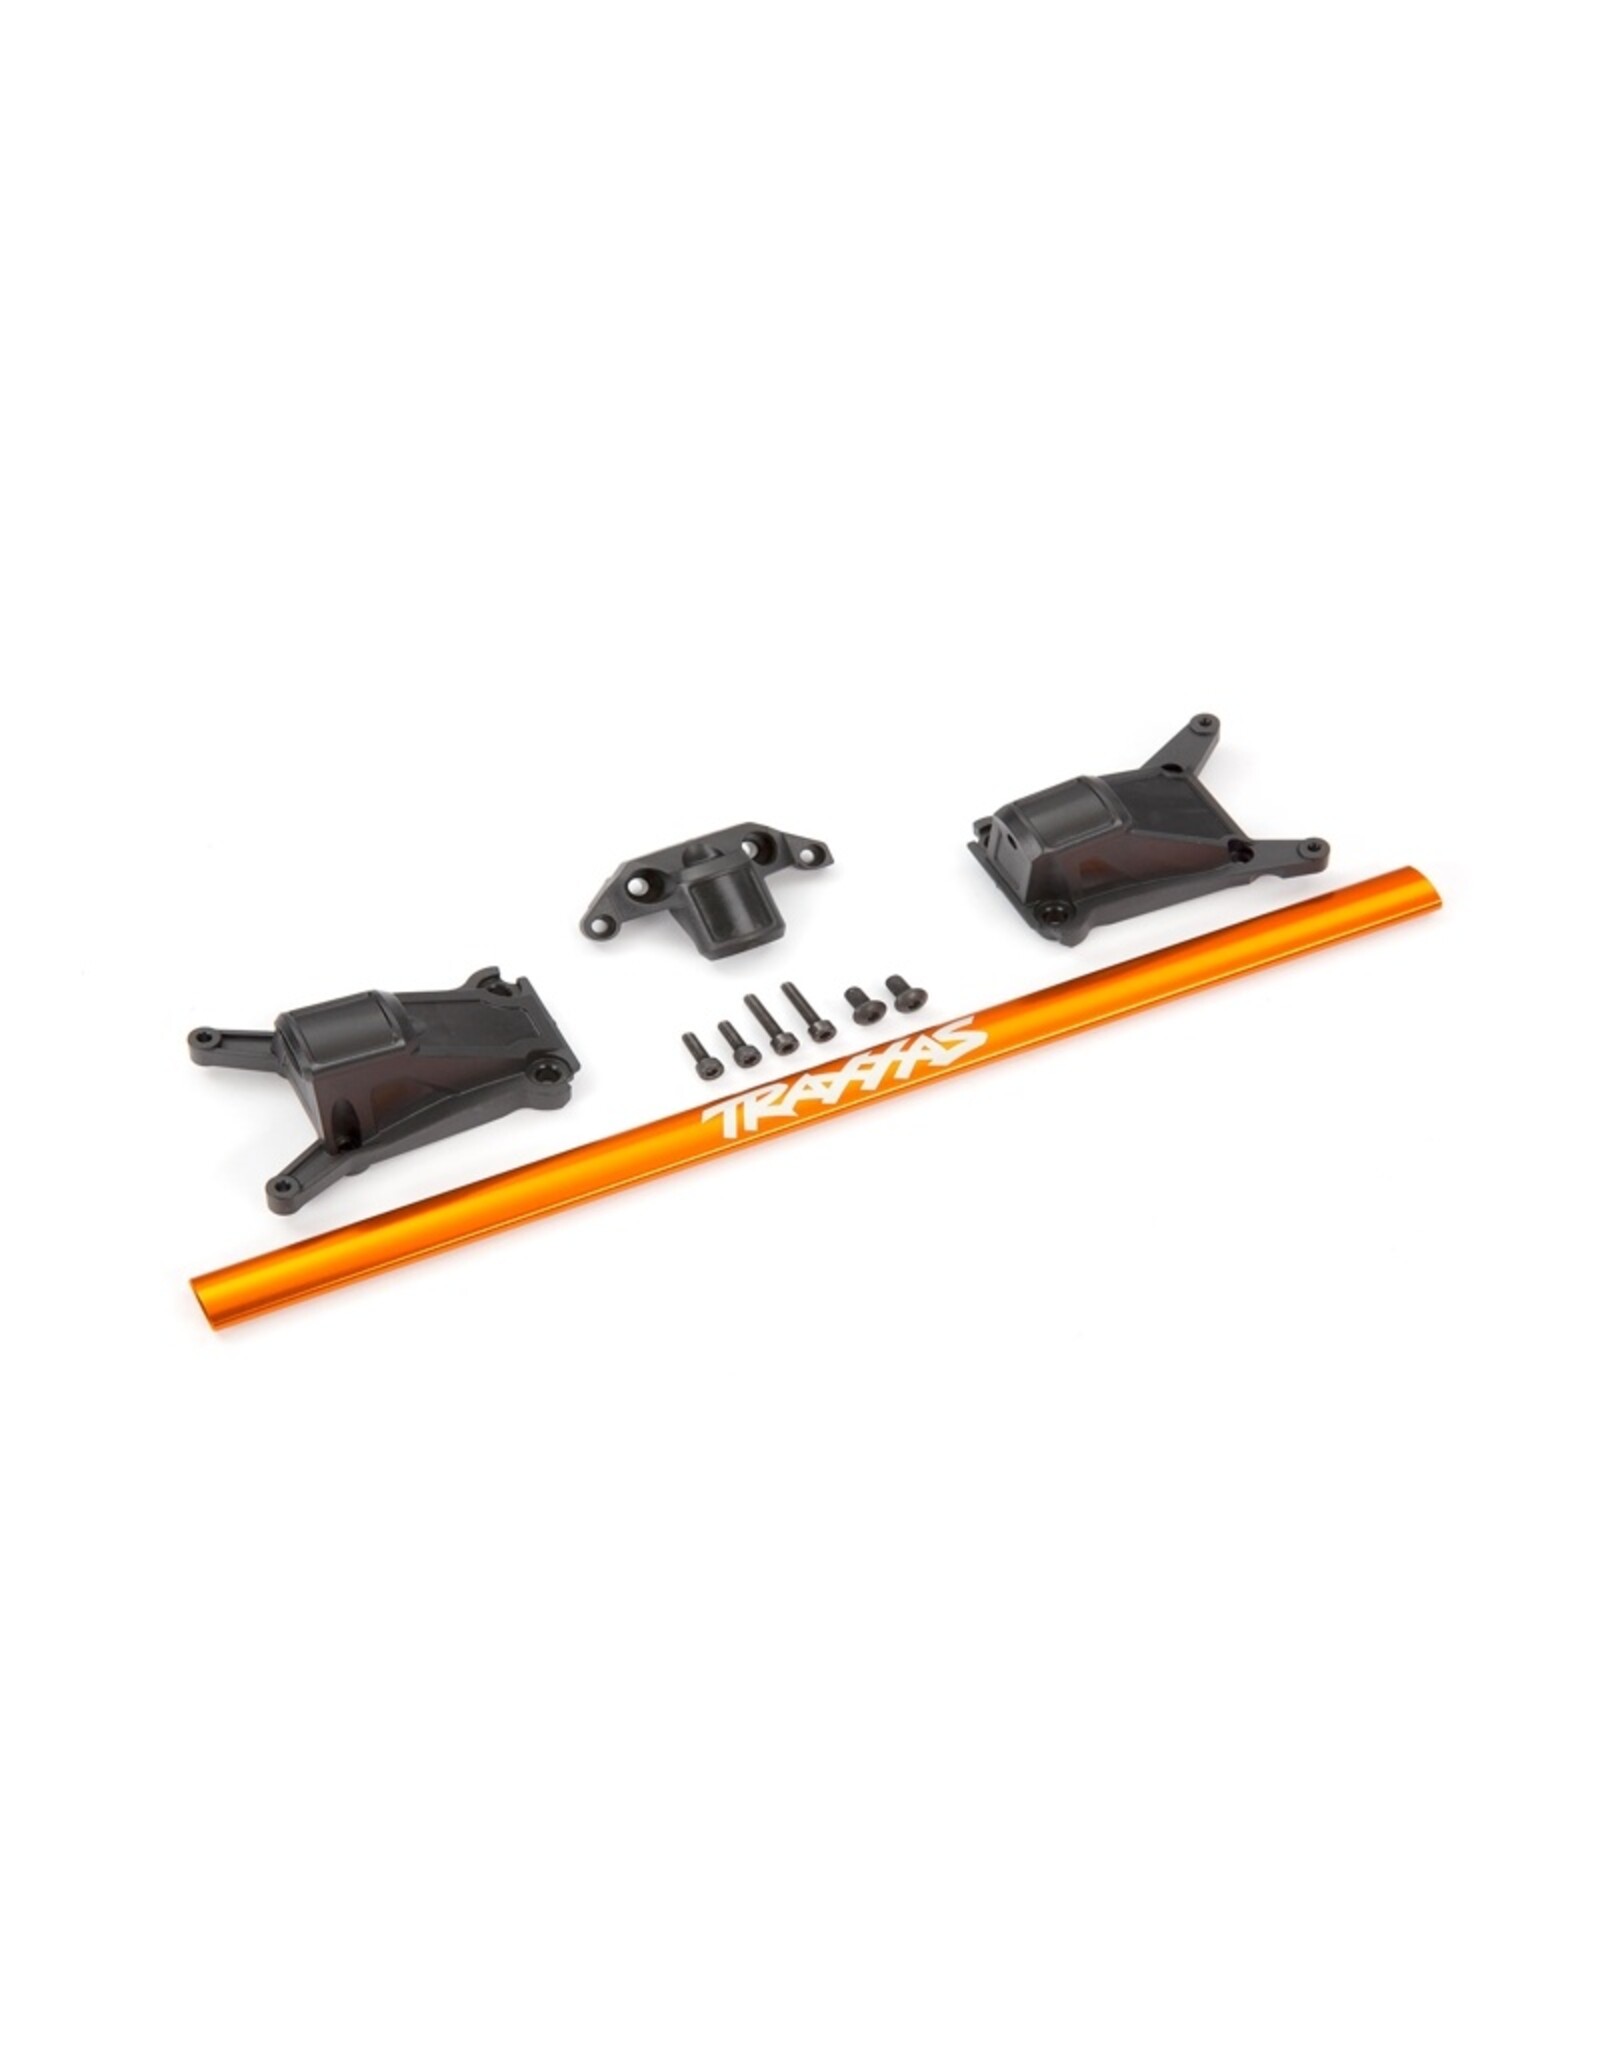 Traxxas TRA6730A - Chassis brace kit, orange (fits Rustler® 4X4 or Slash 4X4 models equipped with Low-CG chassis)